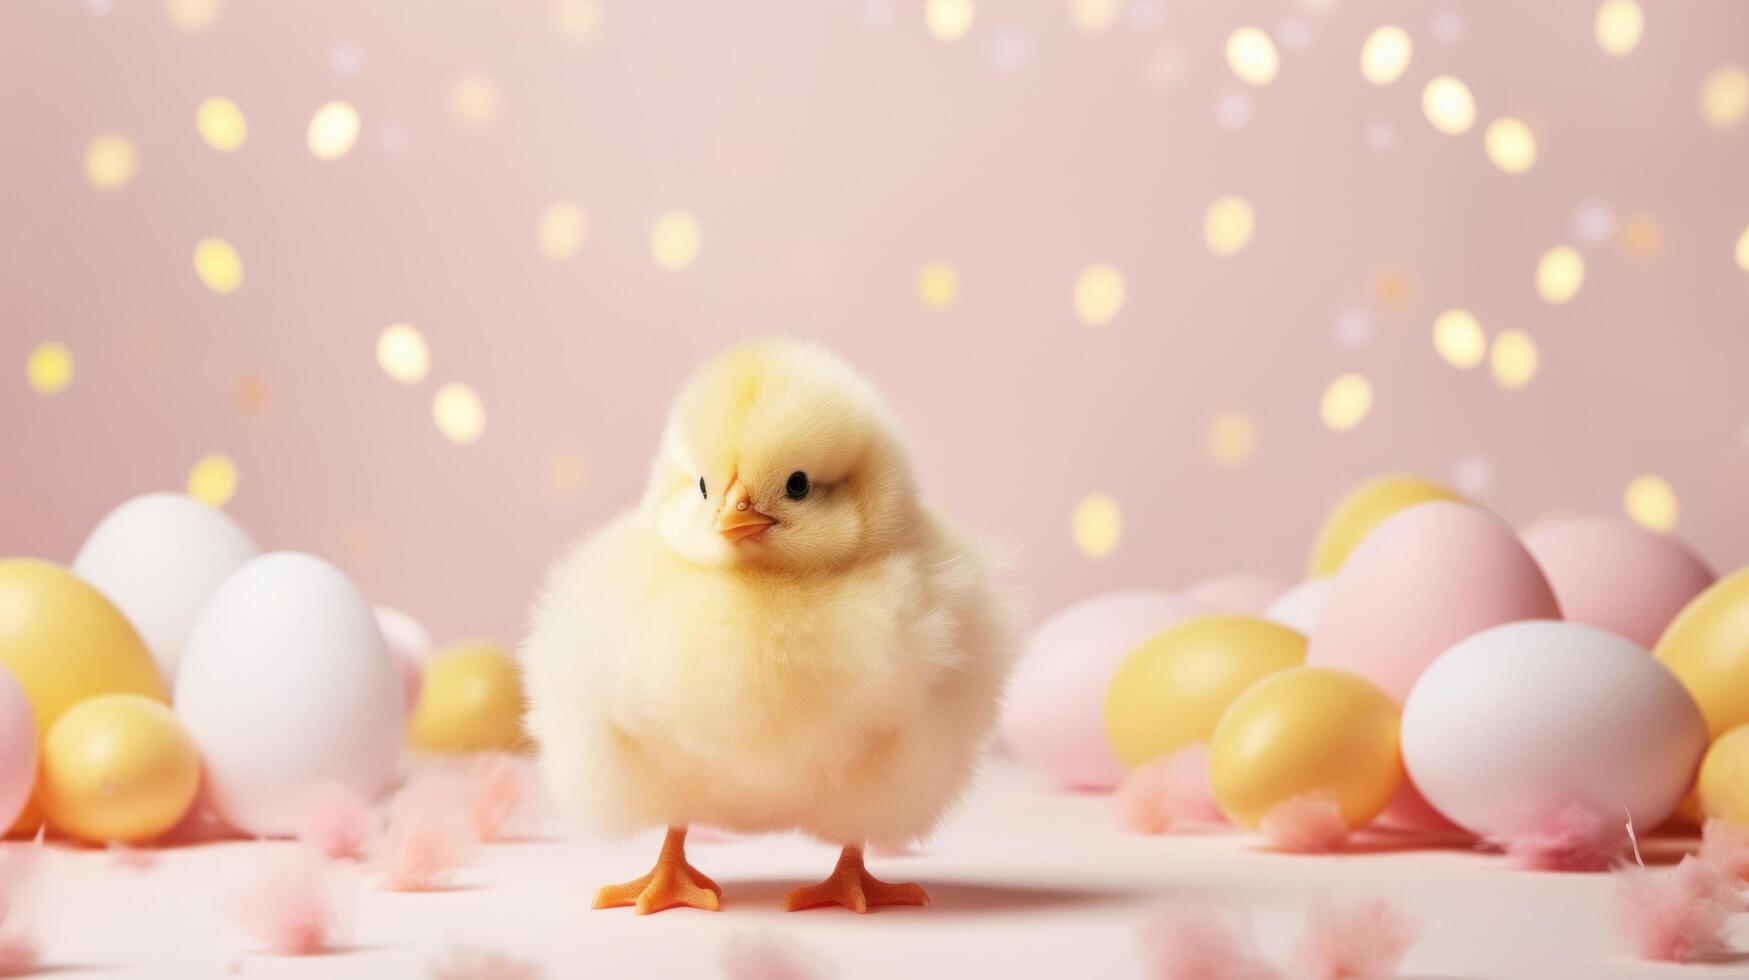 AI generated Cute chicks and Easter decorations combine to form an adorable background for stylish and festive promotions. photo